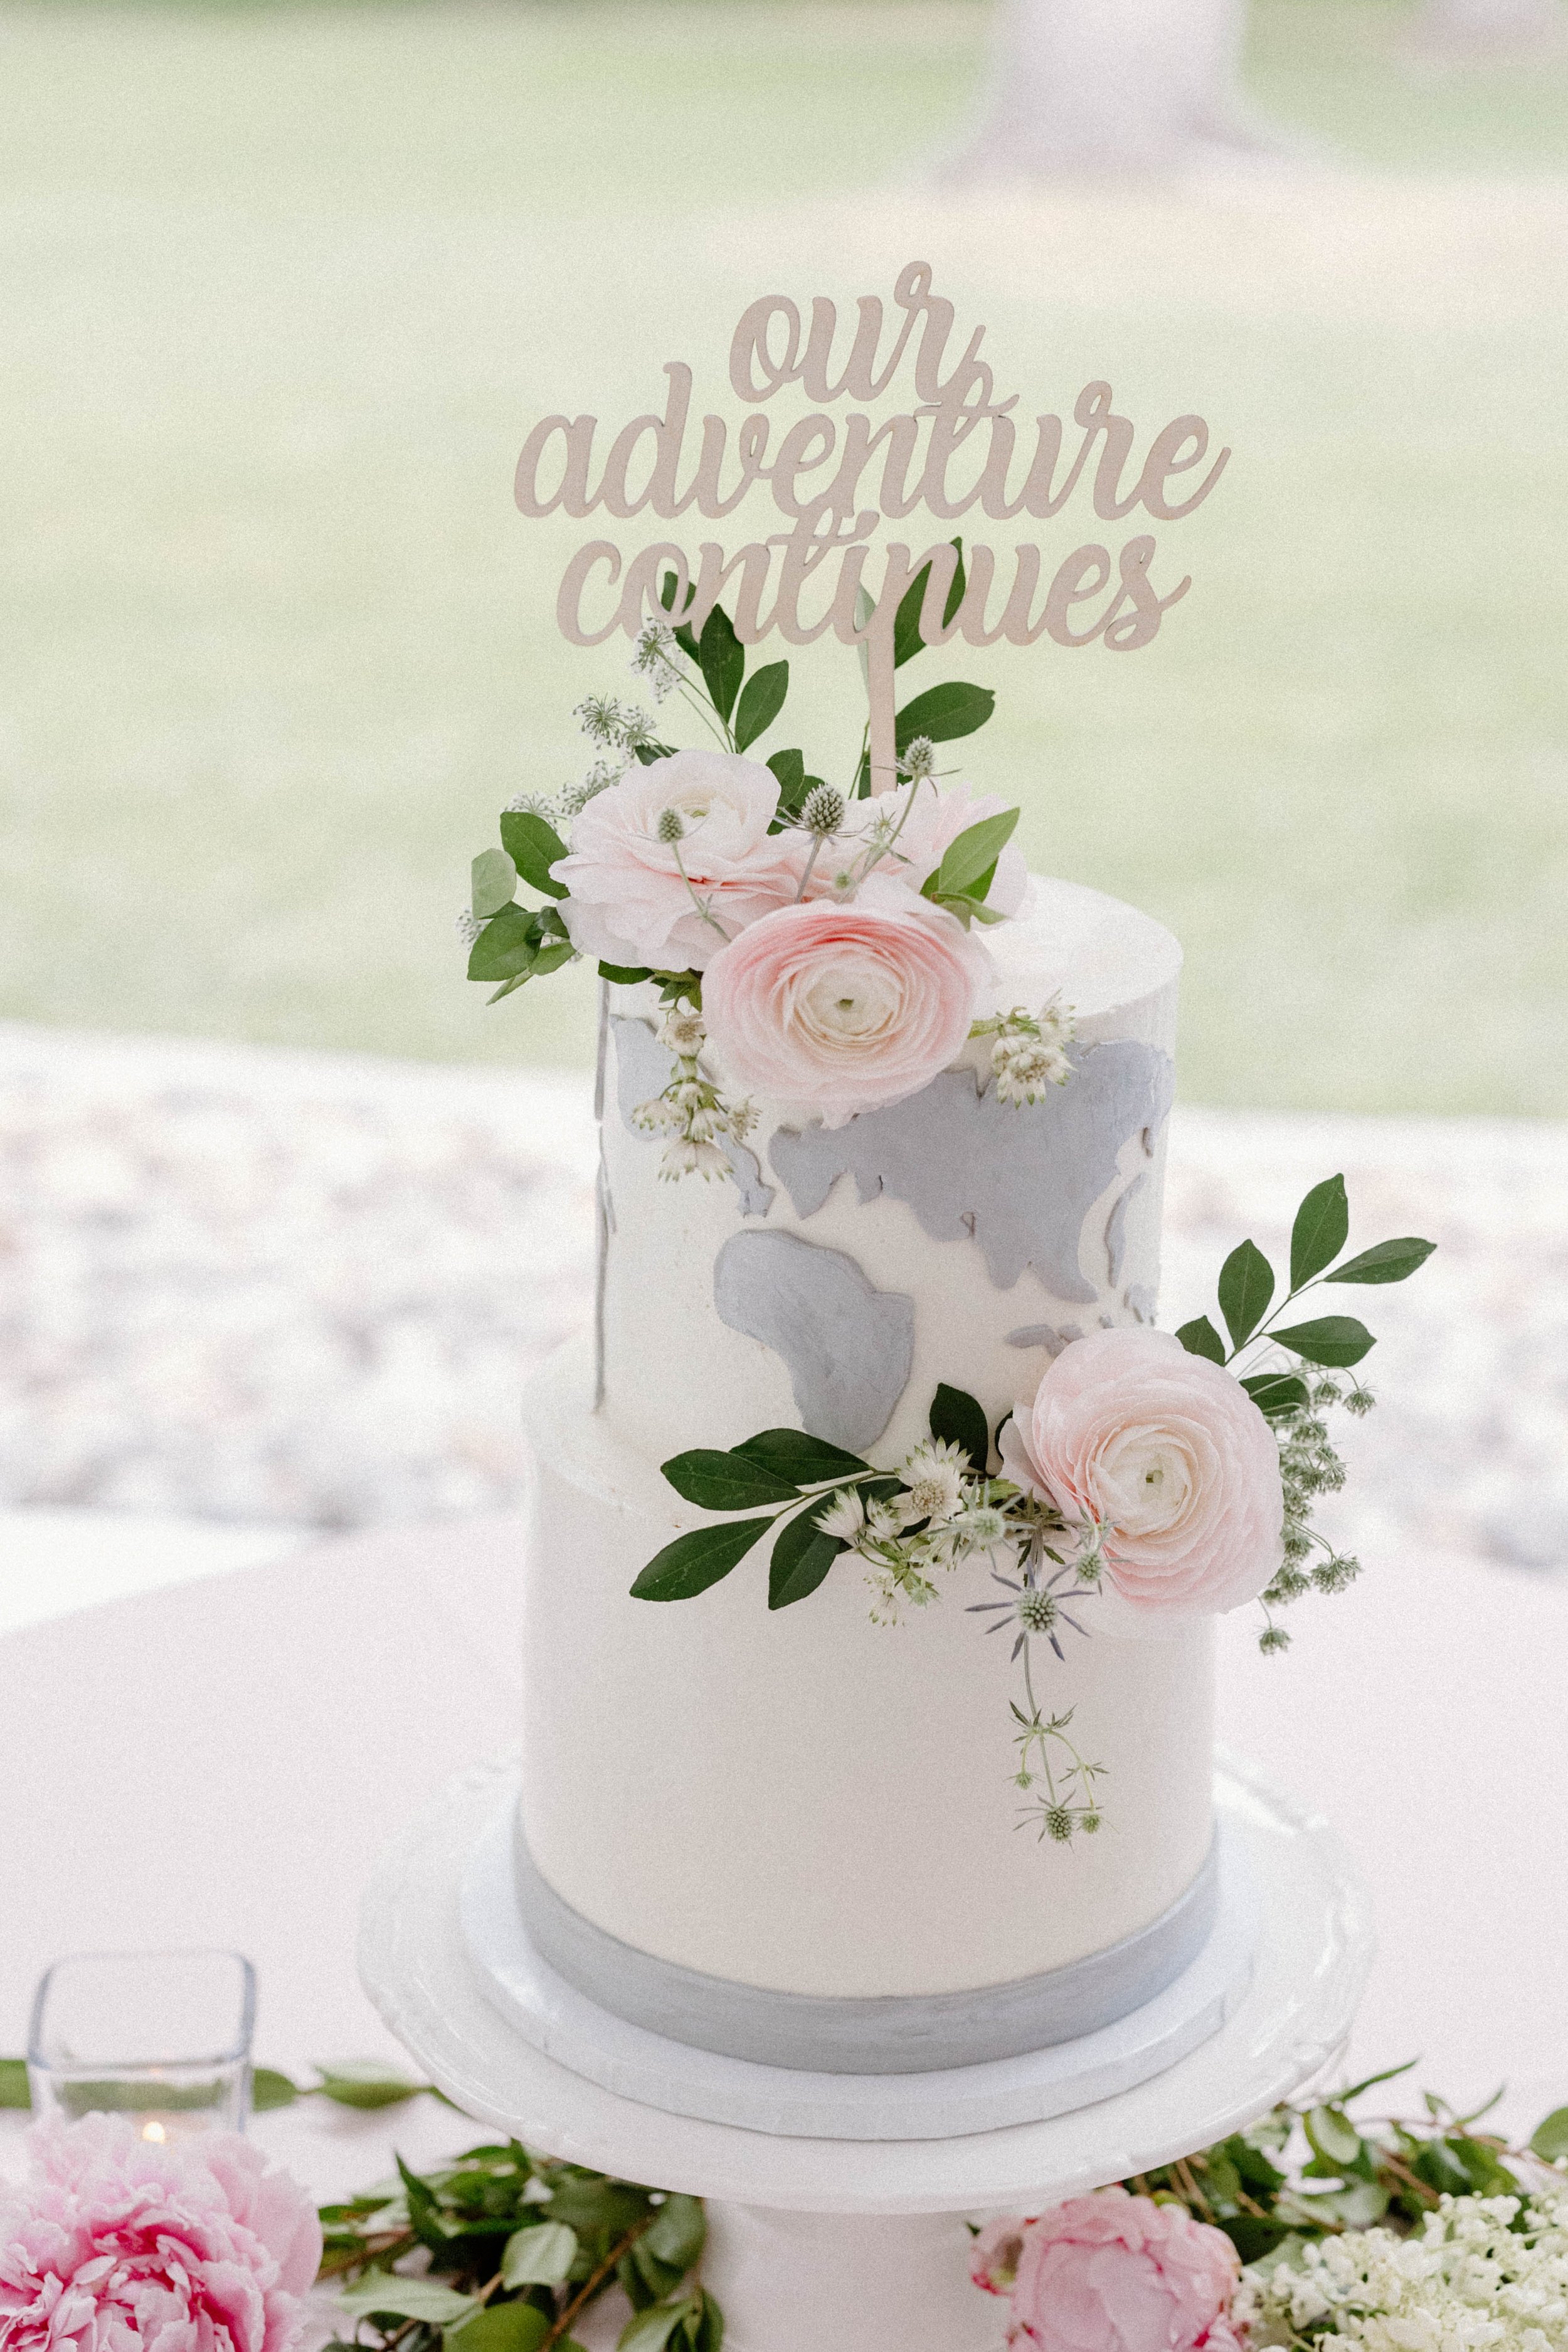 Wedding cake with adventure cake topper